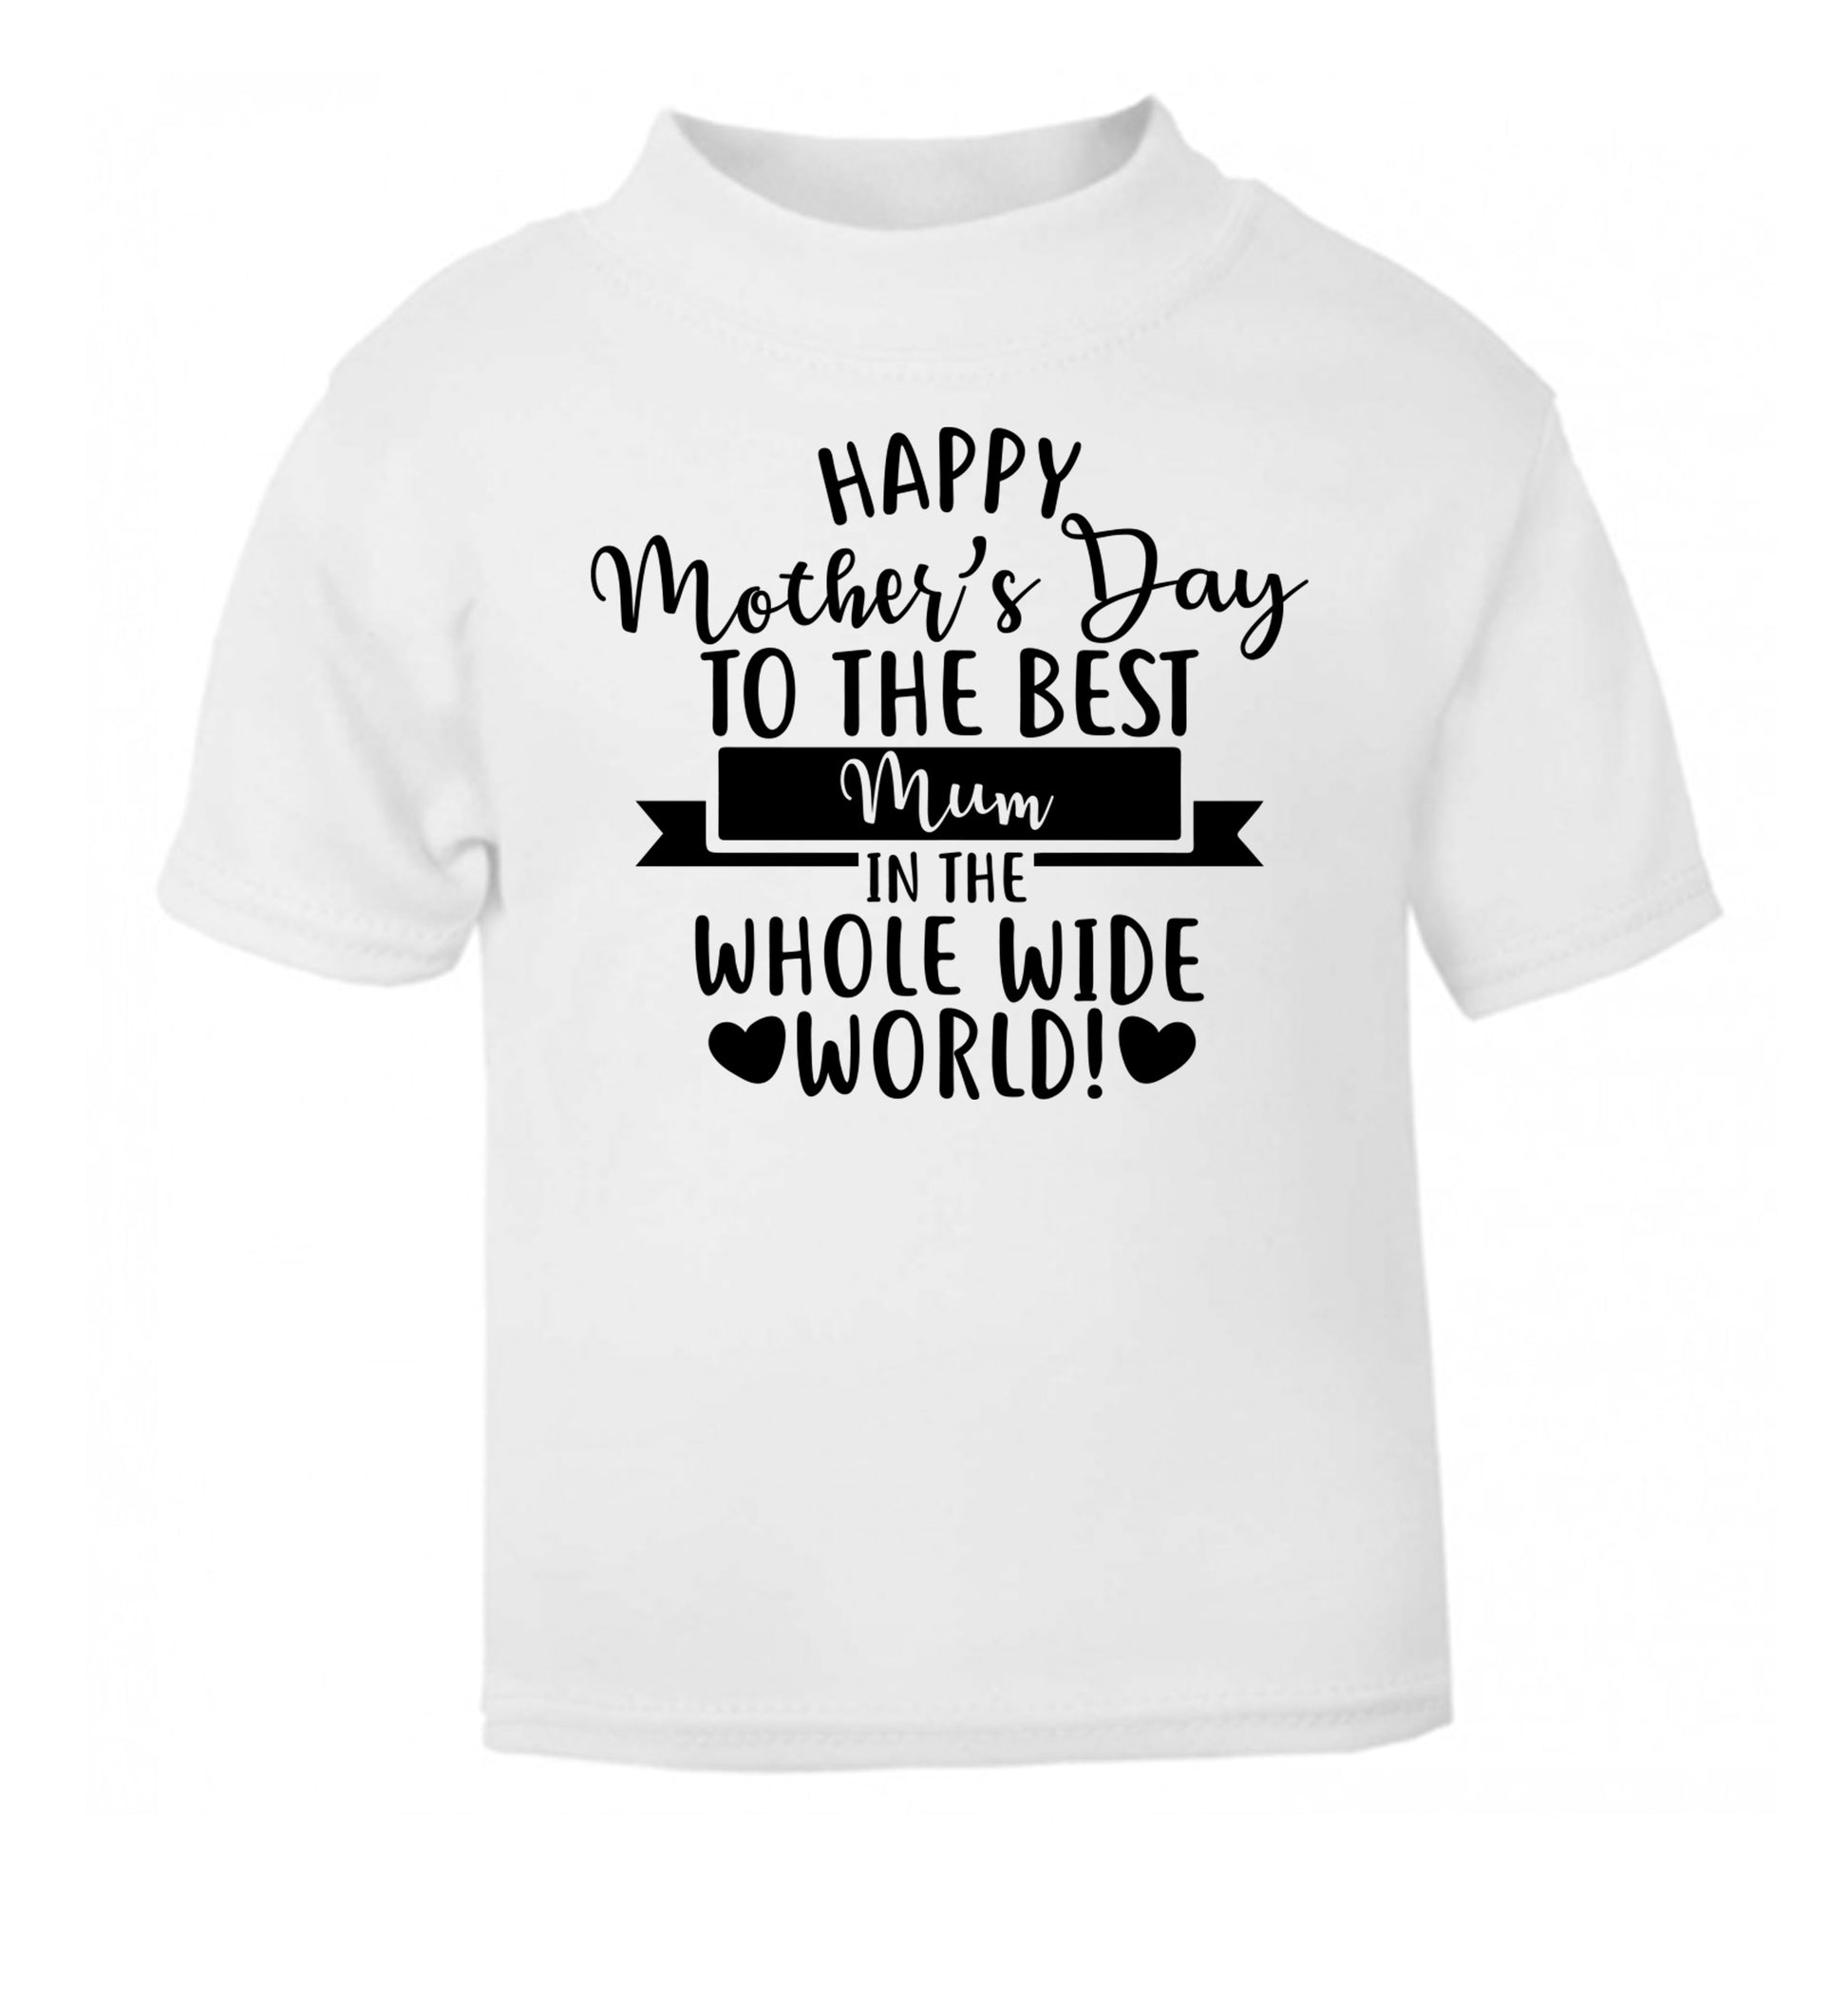 Happy Mother's Day to the best mum in the whole wide world! white Baby Toddler Tshirt 2 Years